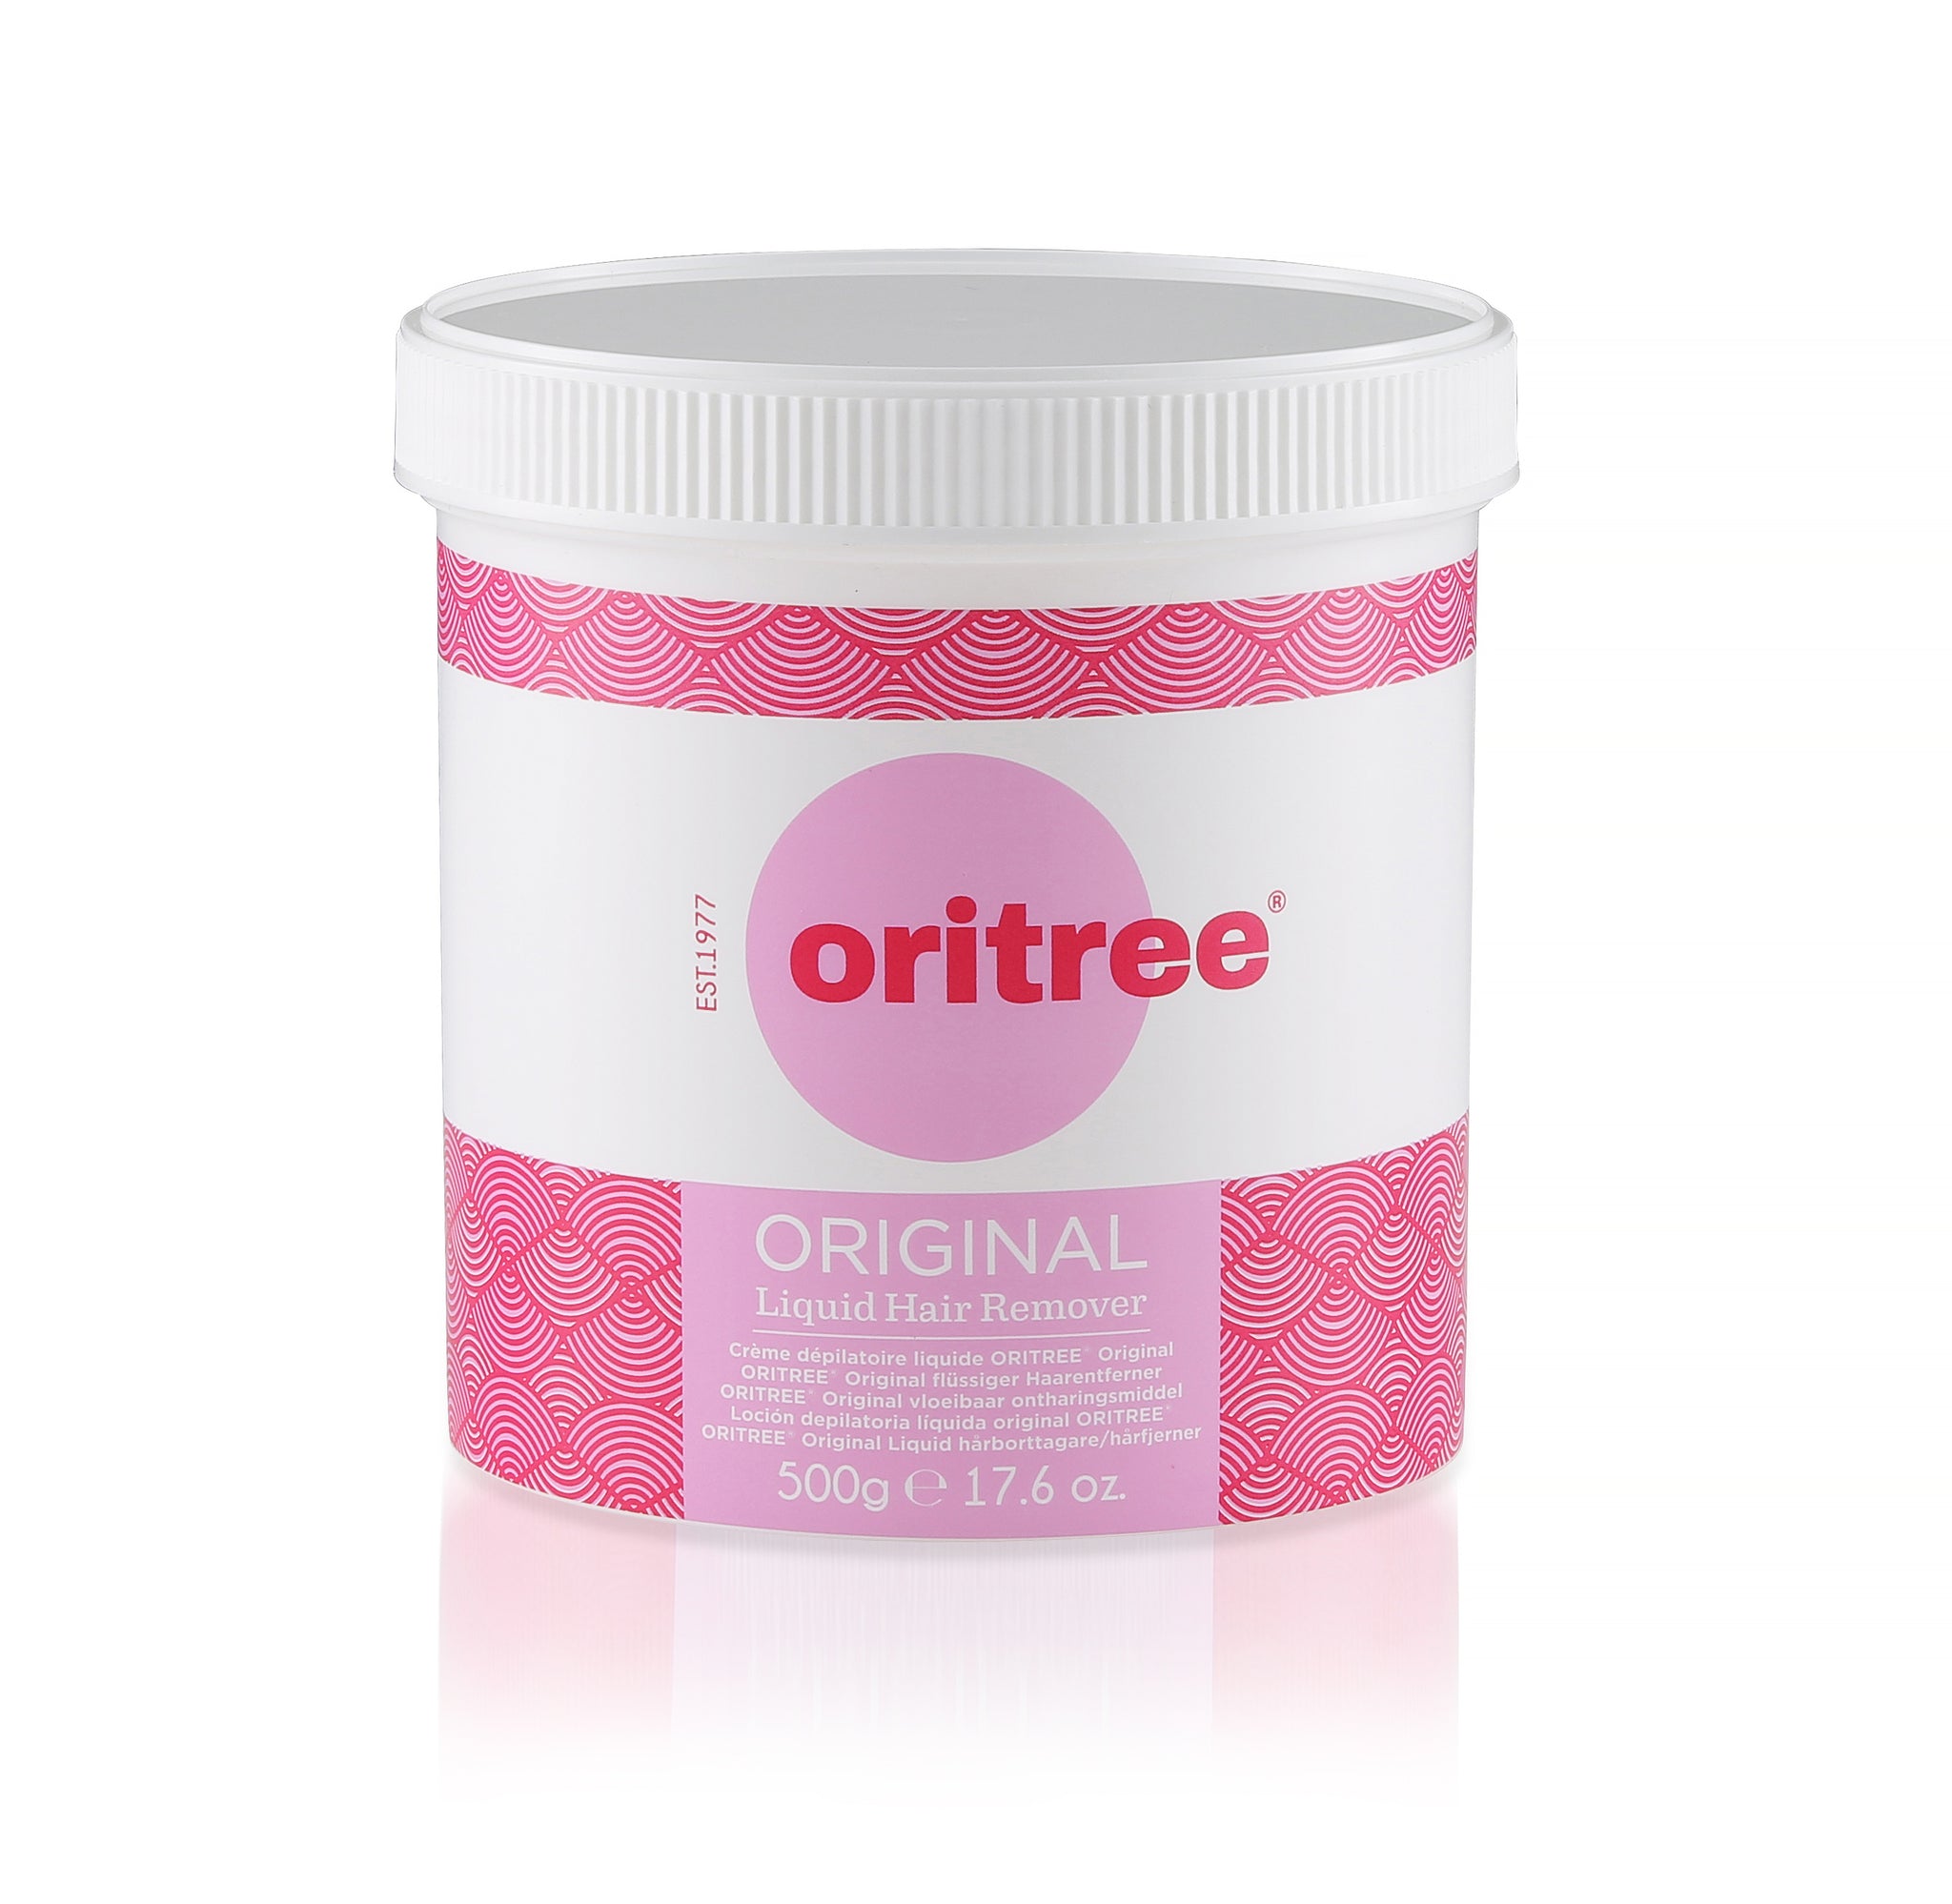 ORITREE Original Liquid Hair Remover 500G Hive - Ultimate Hair and Beauty